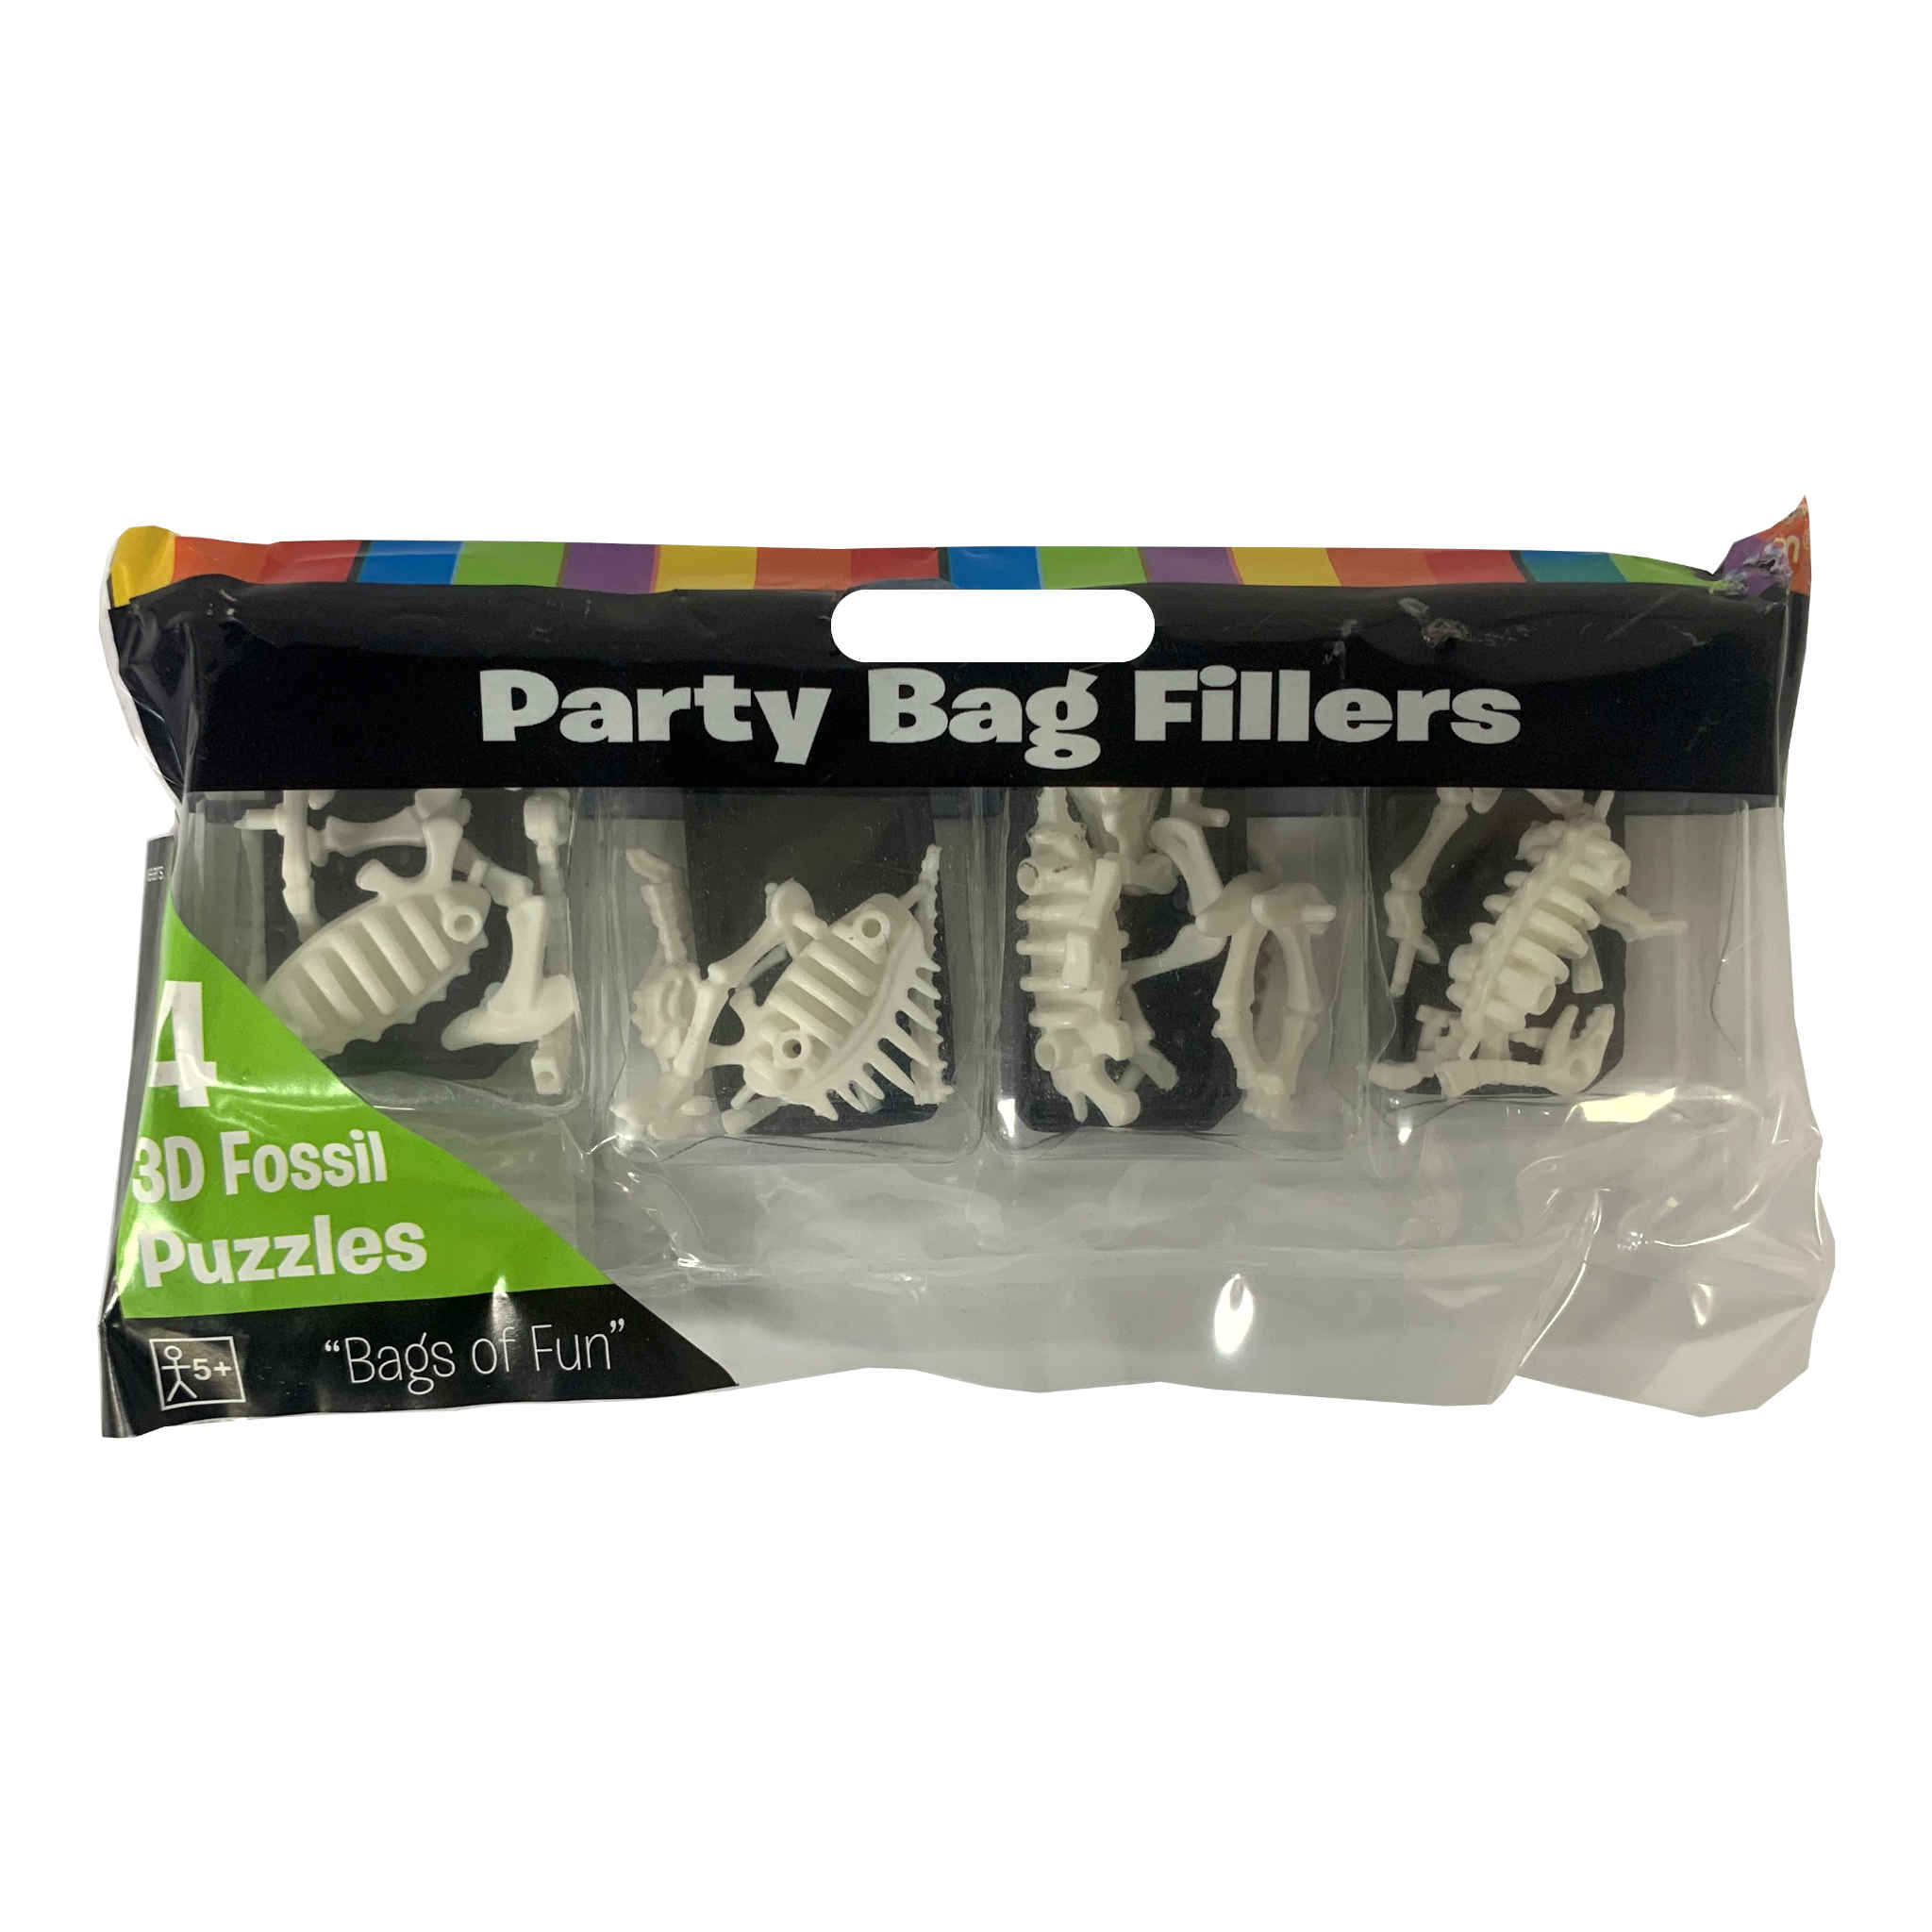 3D Fossil Puzzles Party Bag Fillers | 4 Pack